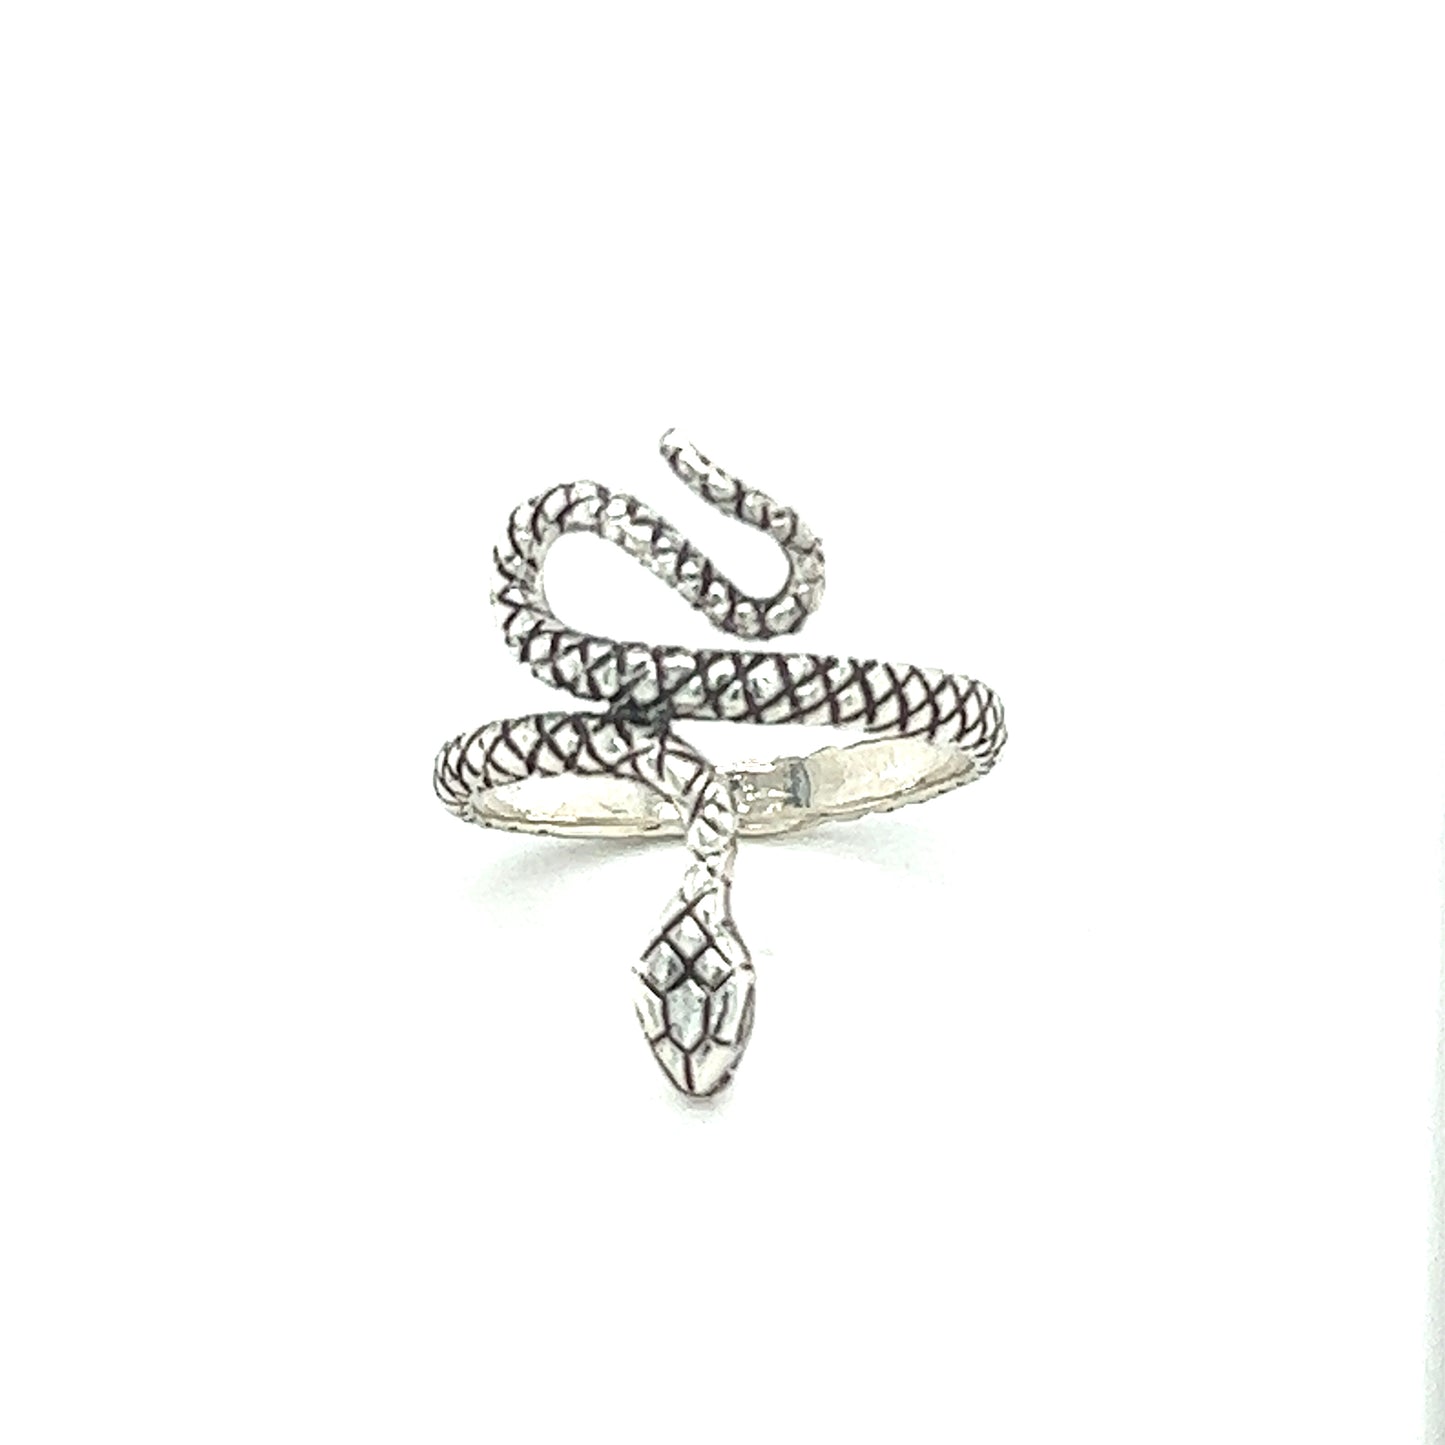 A Super Silver Textured Snake Ring exudes a primal energy against a clean white background.